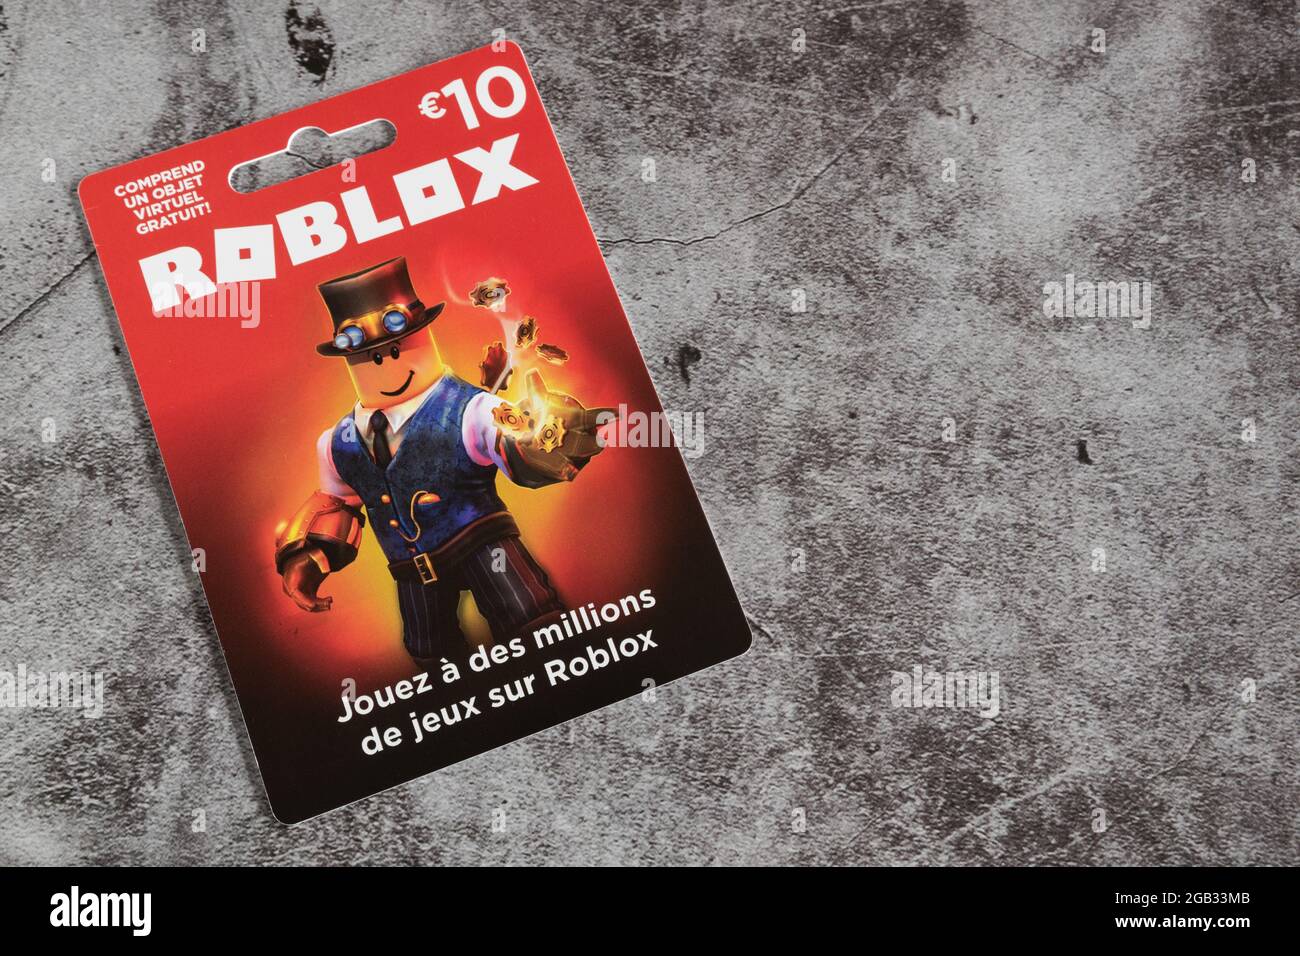 Roblox game gift card,Roblox is a multiplayer online video game, gifts  cards roblox 